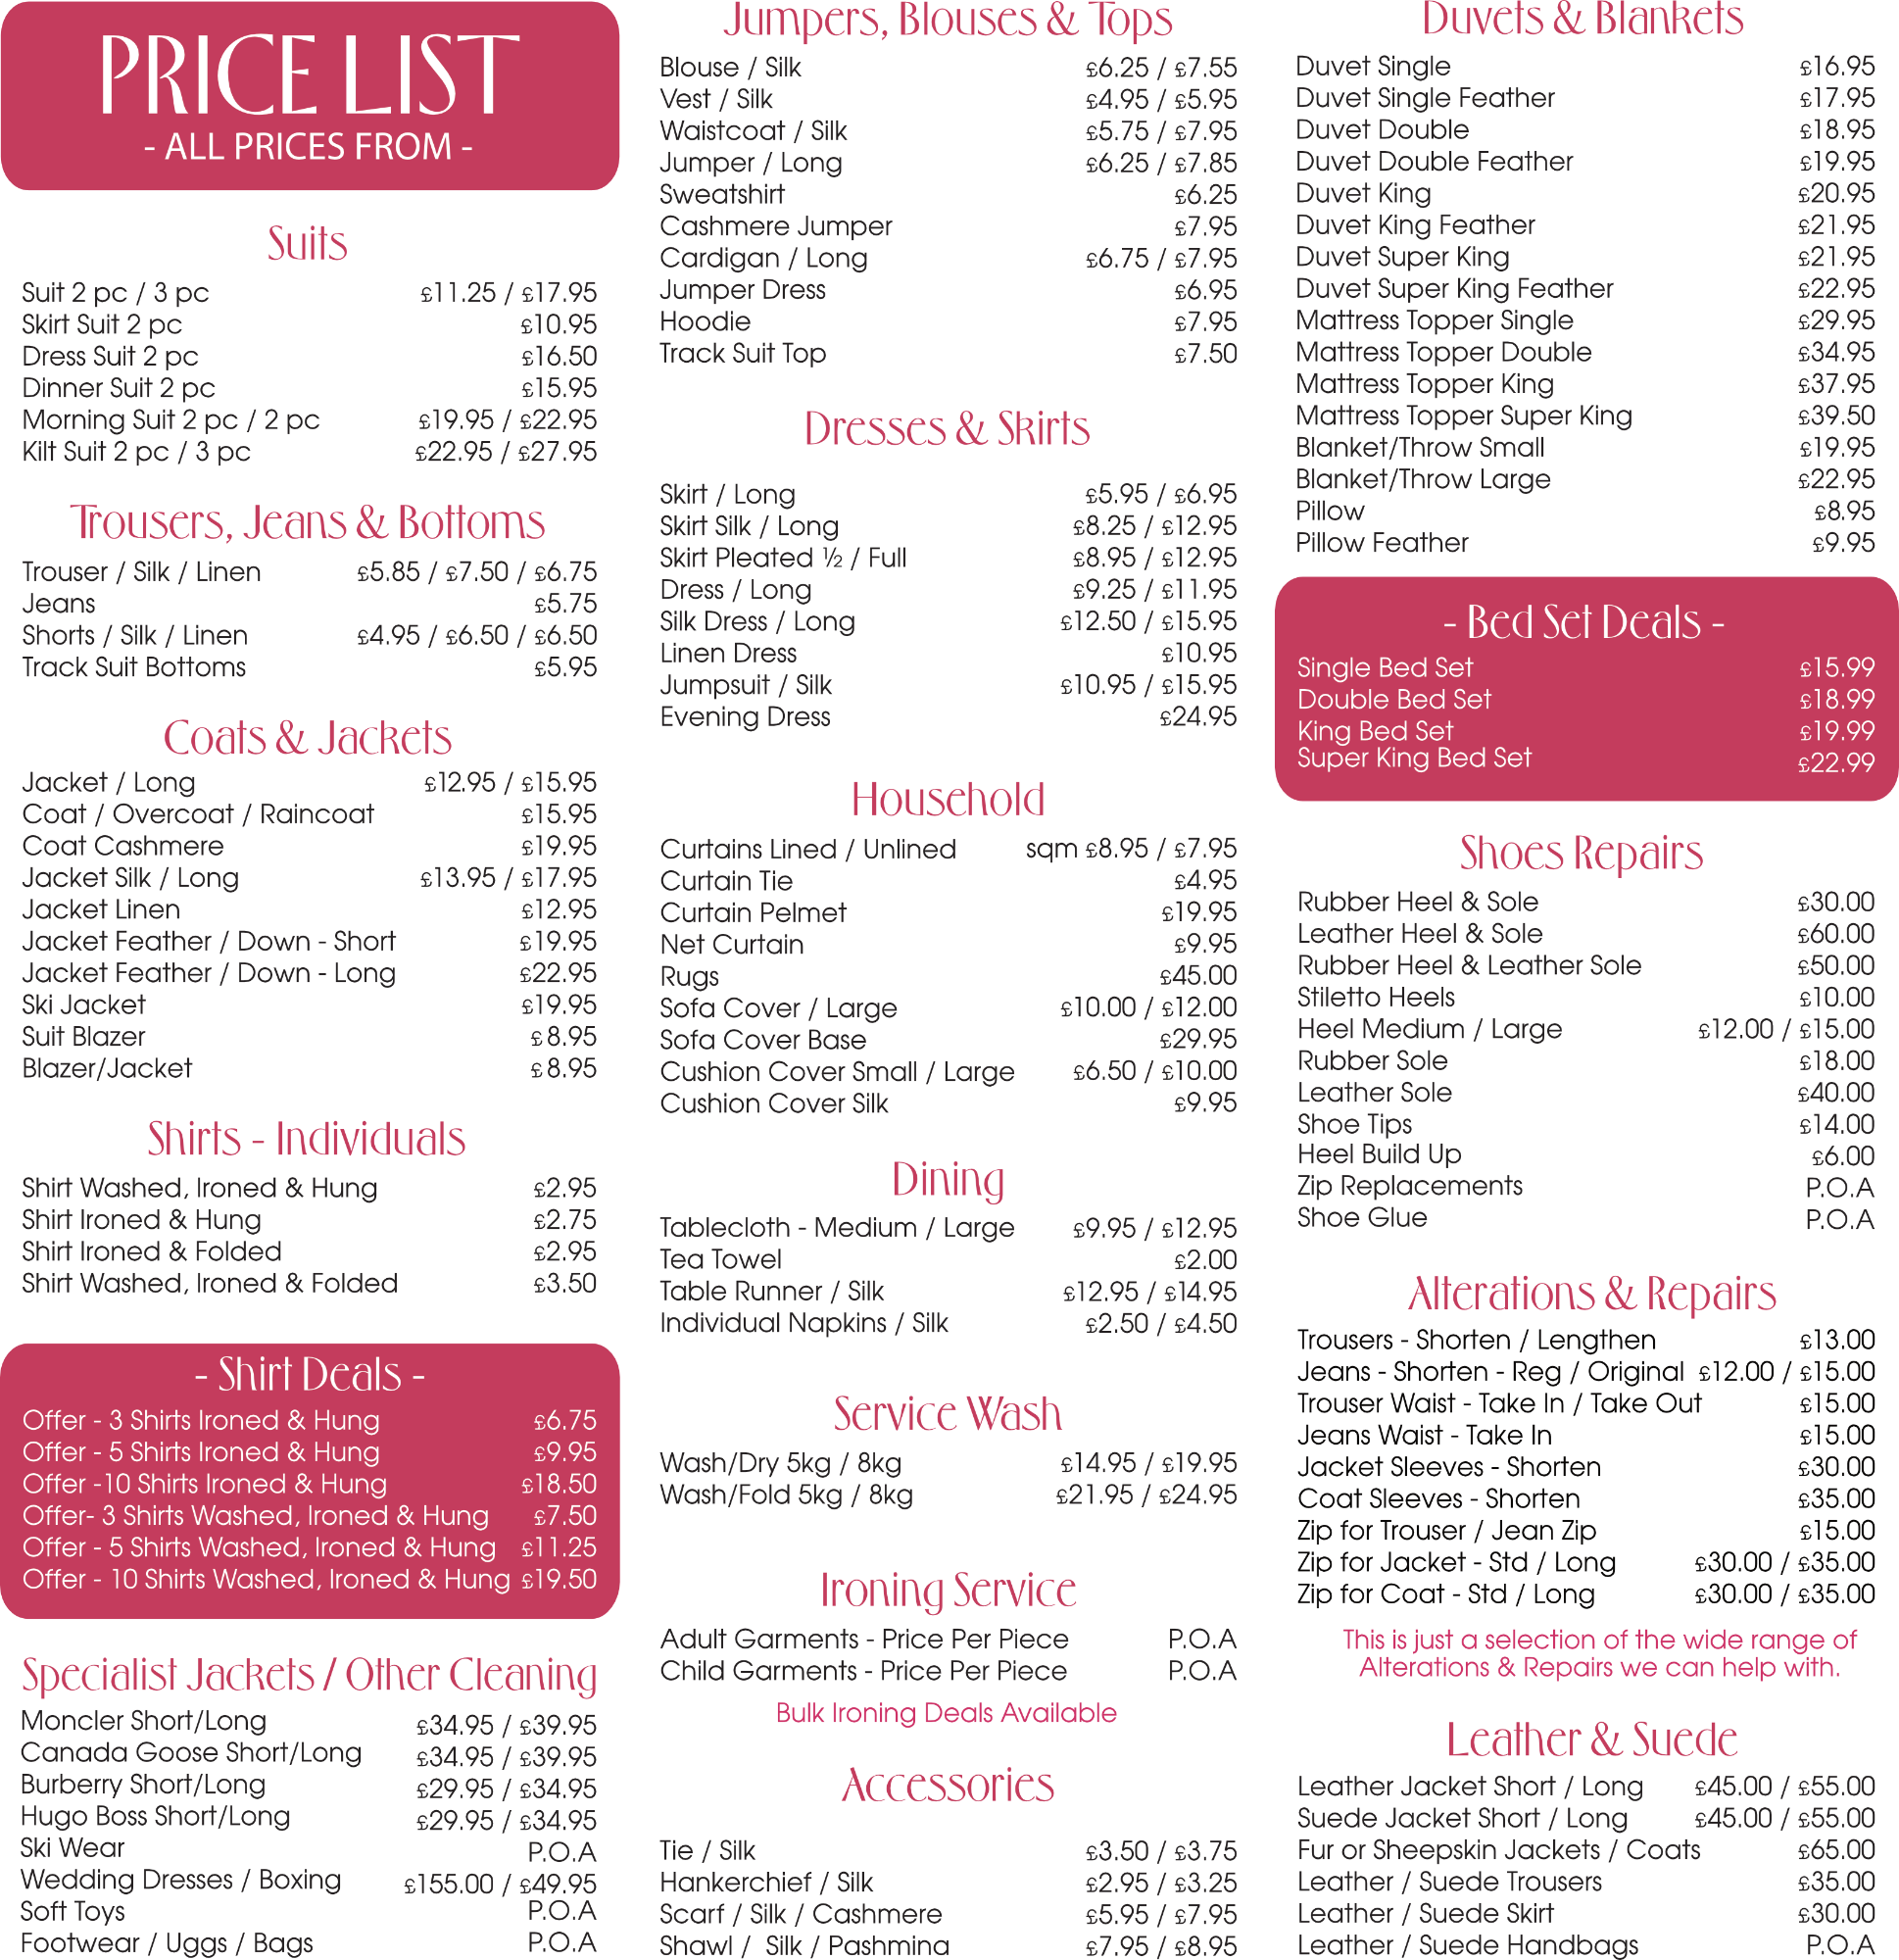 Pearls Drycleaners Price List 2021